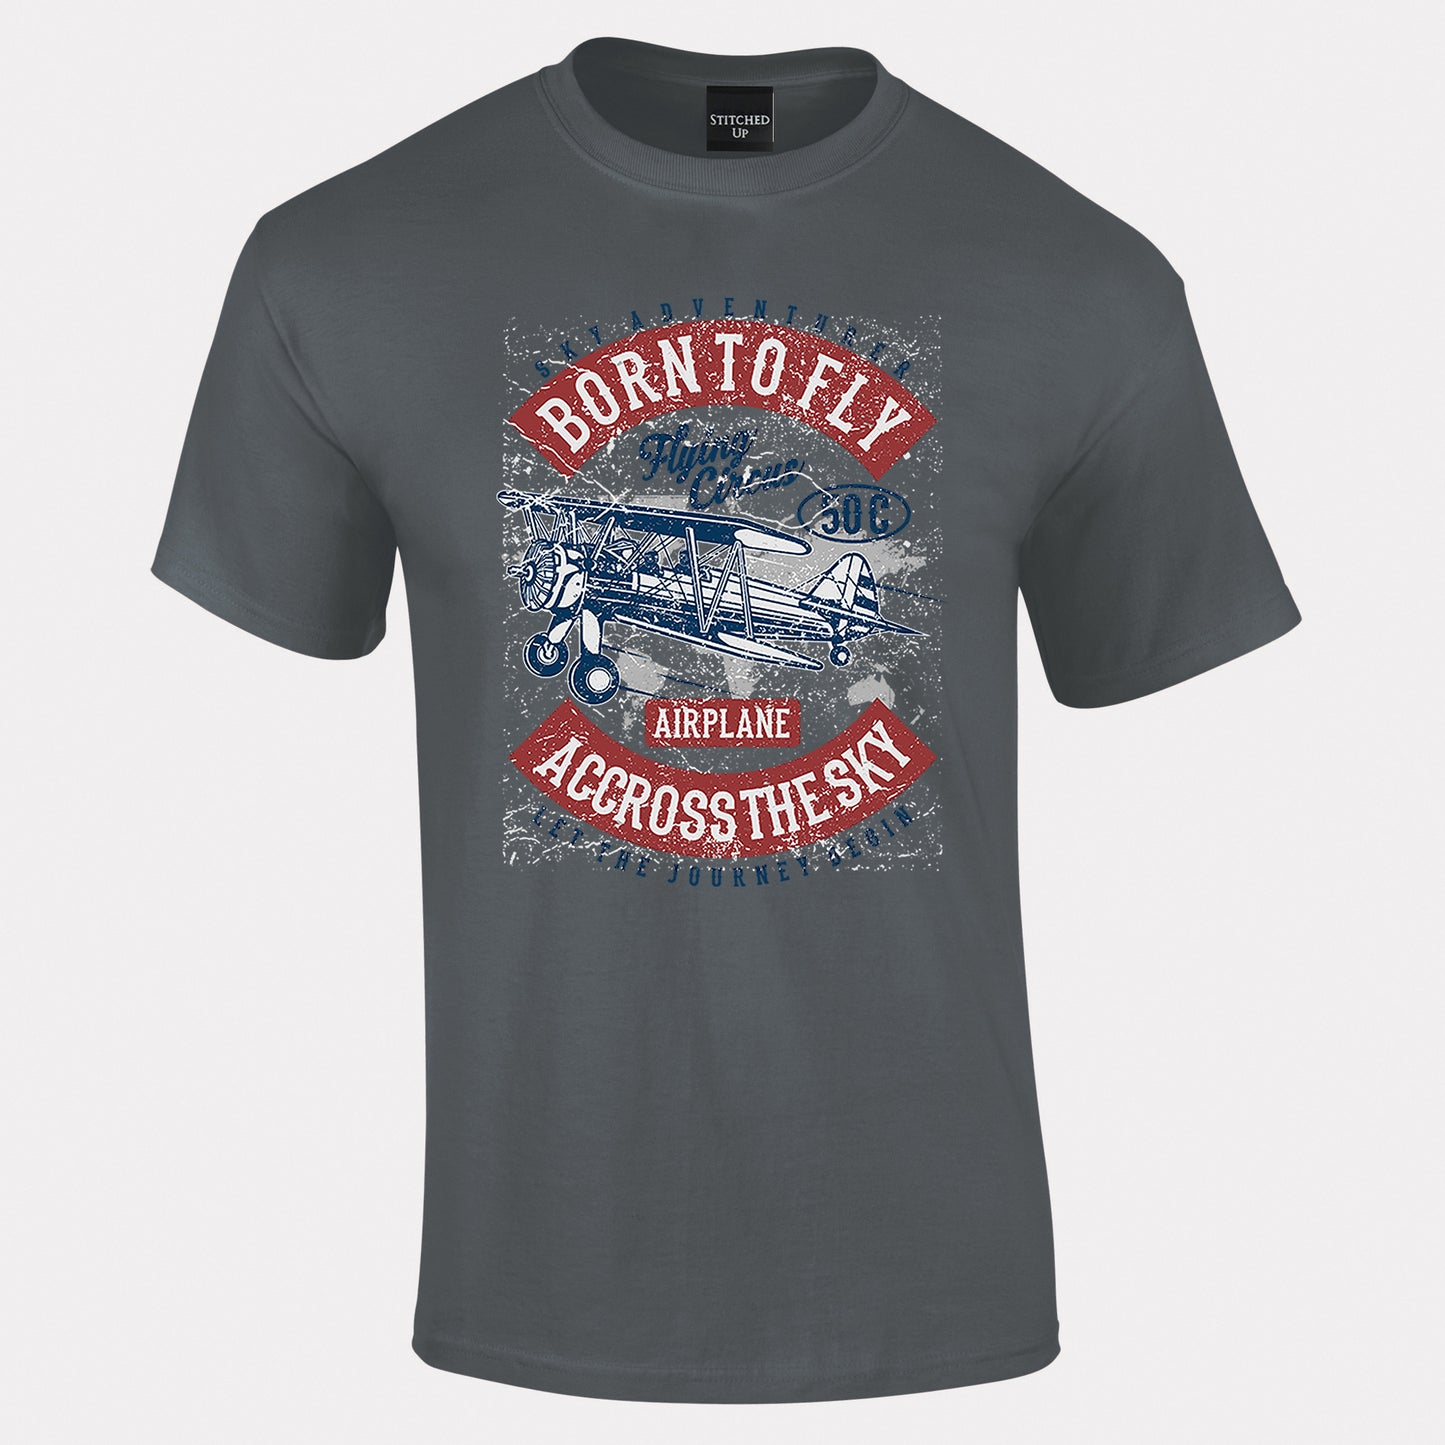 Vintage Born to Fly T-Shirt Retro look